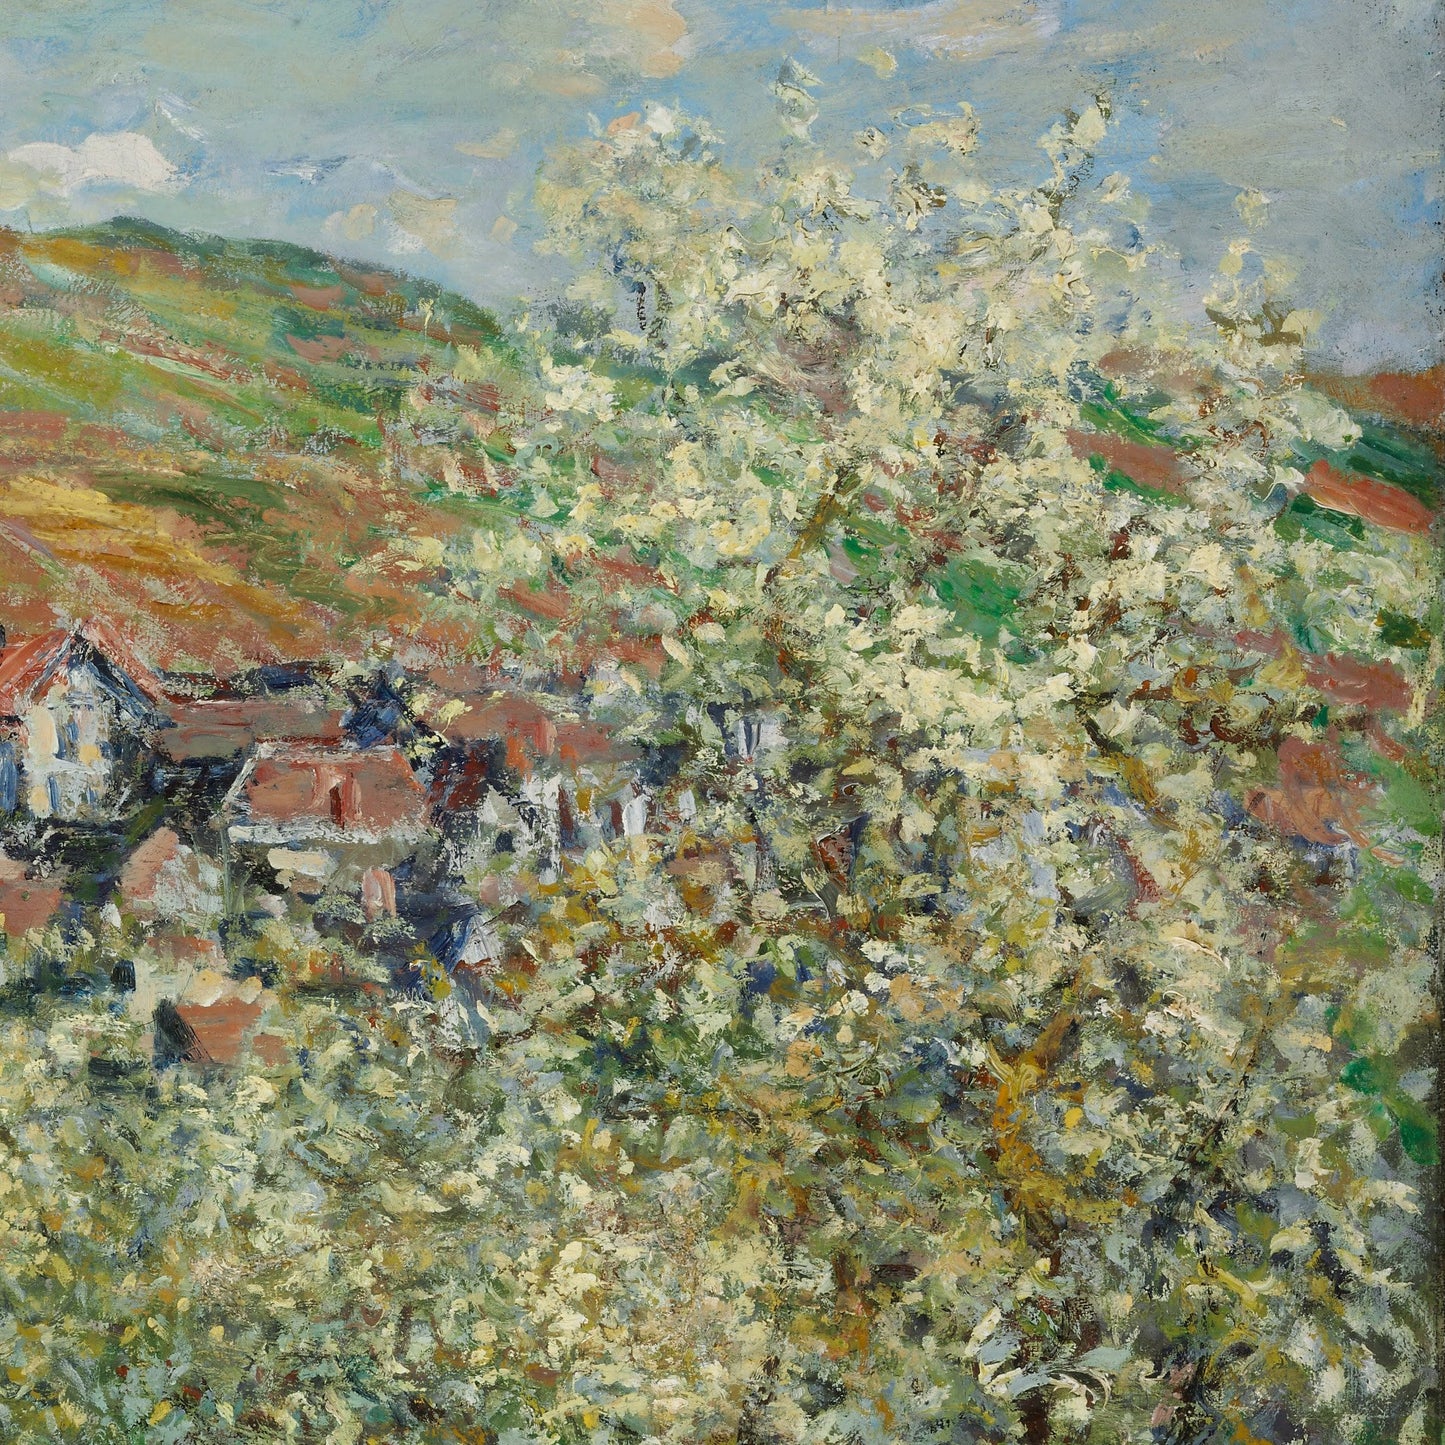 Plum Trees in Blossom by Claude Monet, 3d Printed with texture and brush strokes looks like original oil-painting, code:301